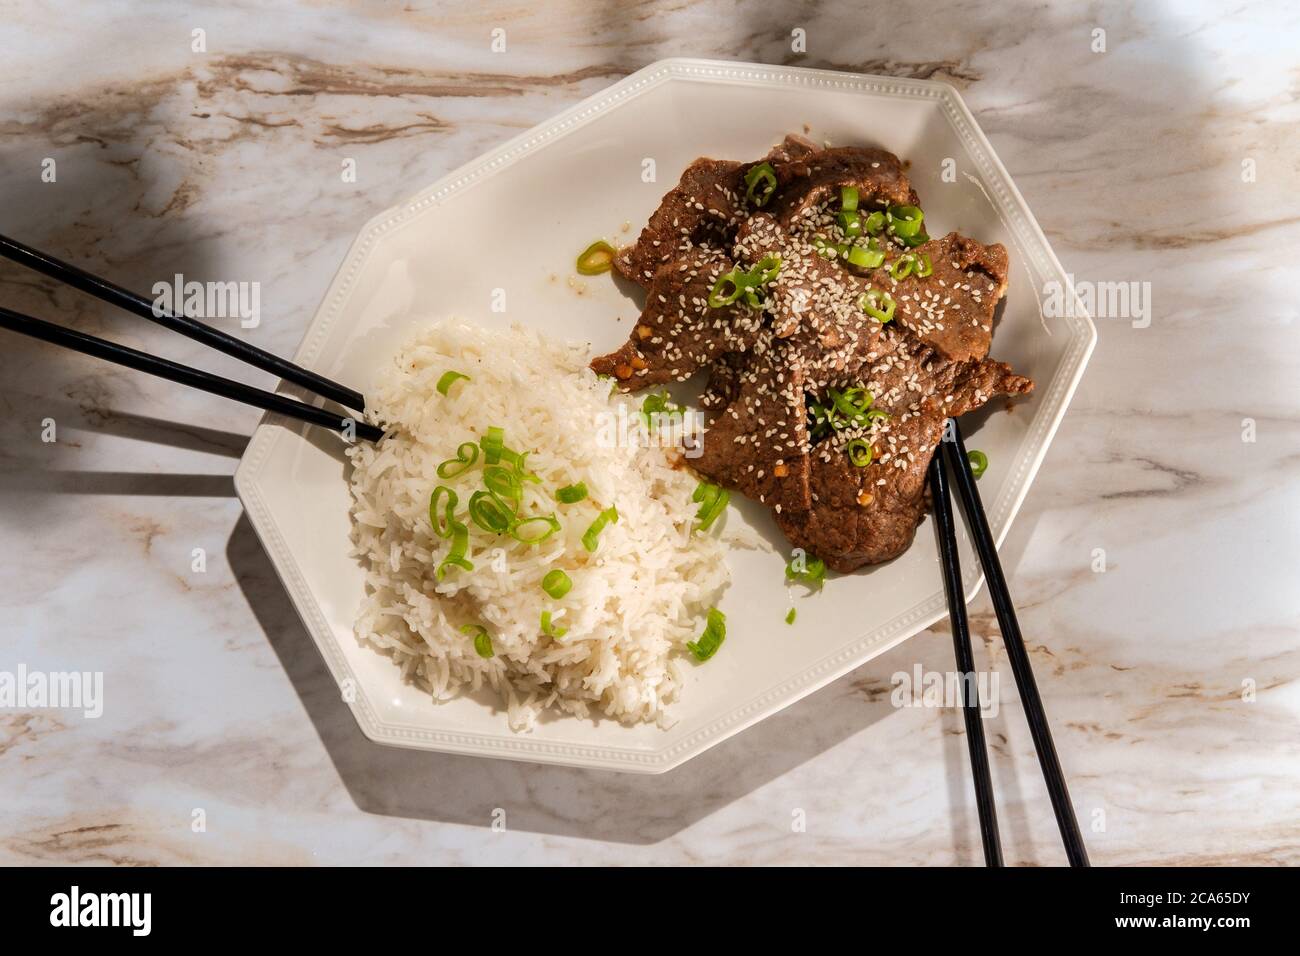 Vietnamese pan grilled sesame seed beef with side of white rice Stock Photo